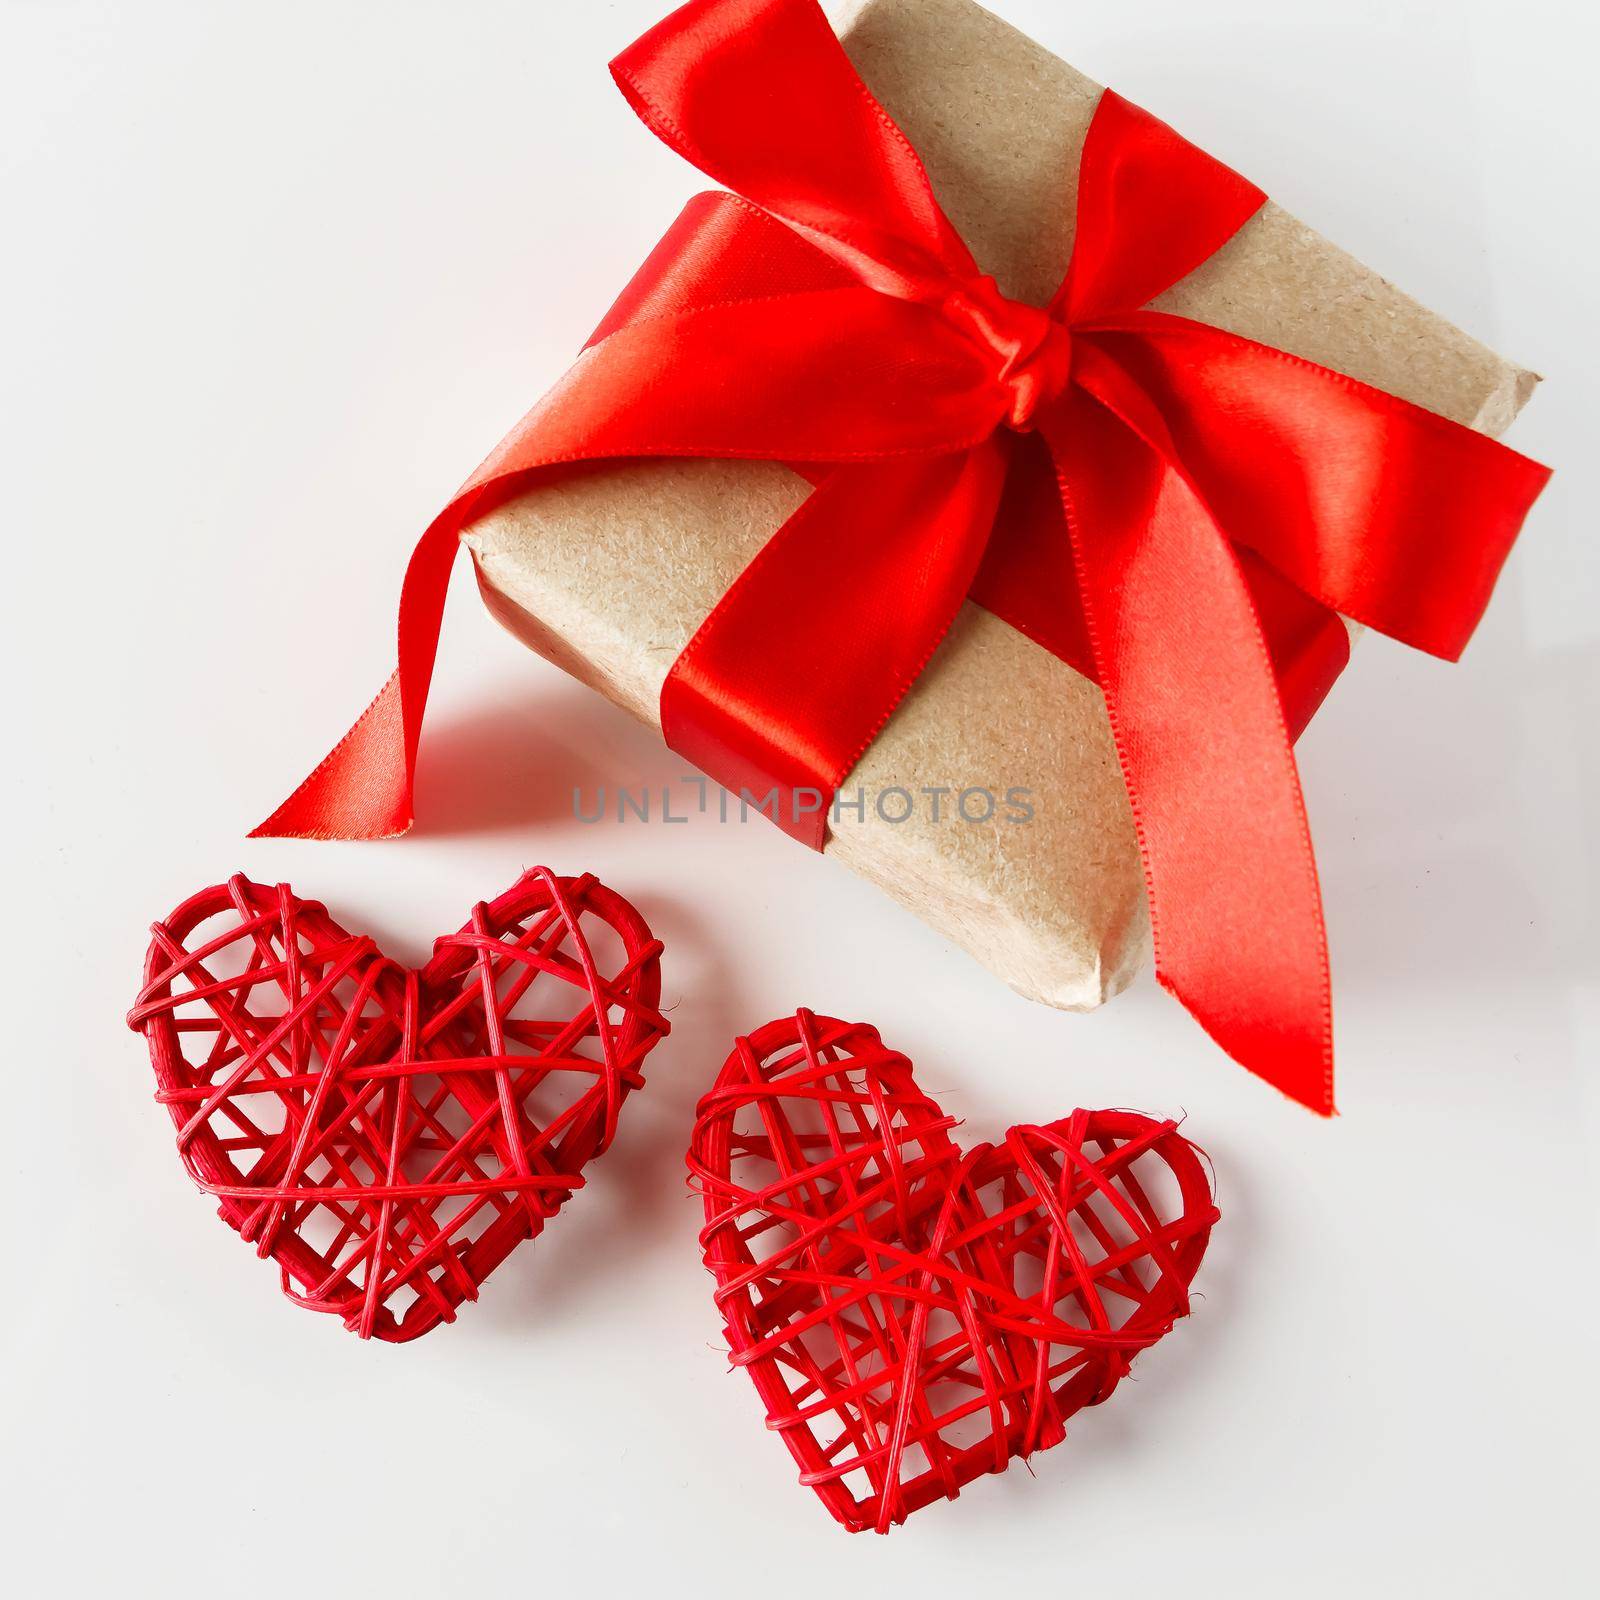 Valentine's day gift and red hearts on a white background. Valentine's day surprise with red ribbon and 2 hearts close-up on a white background